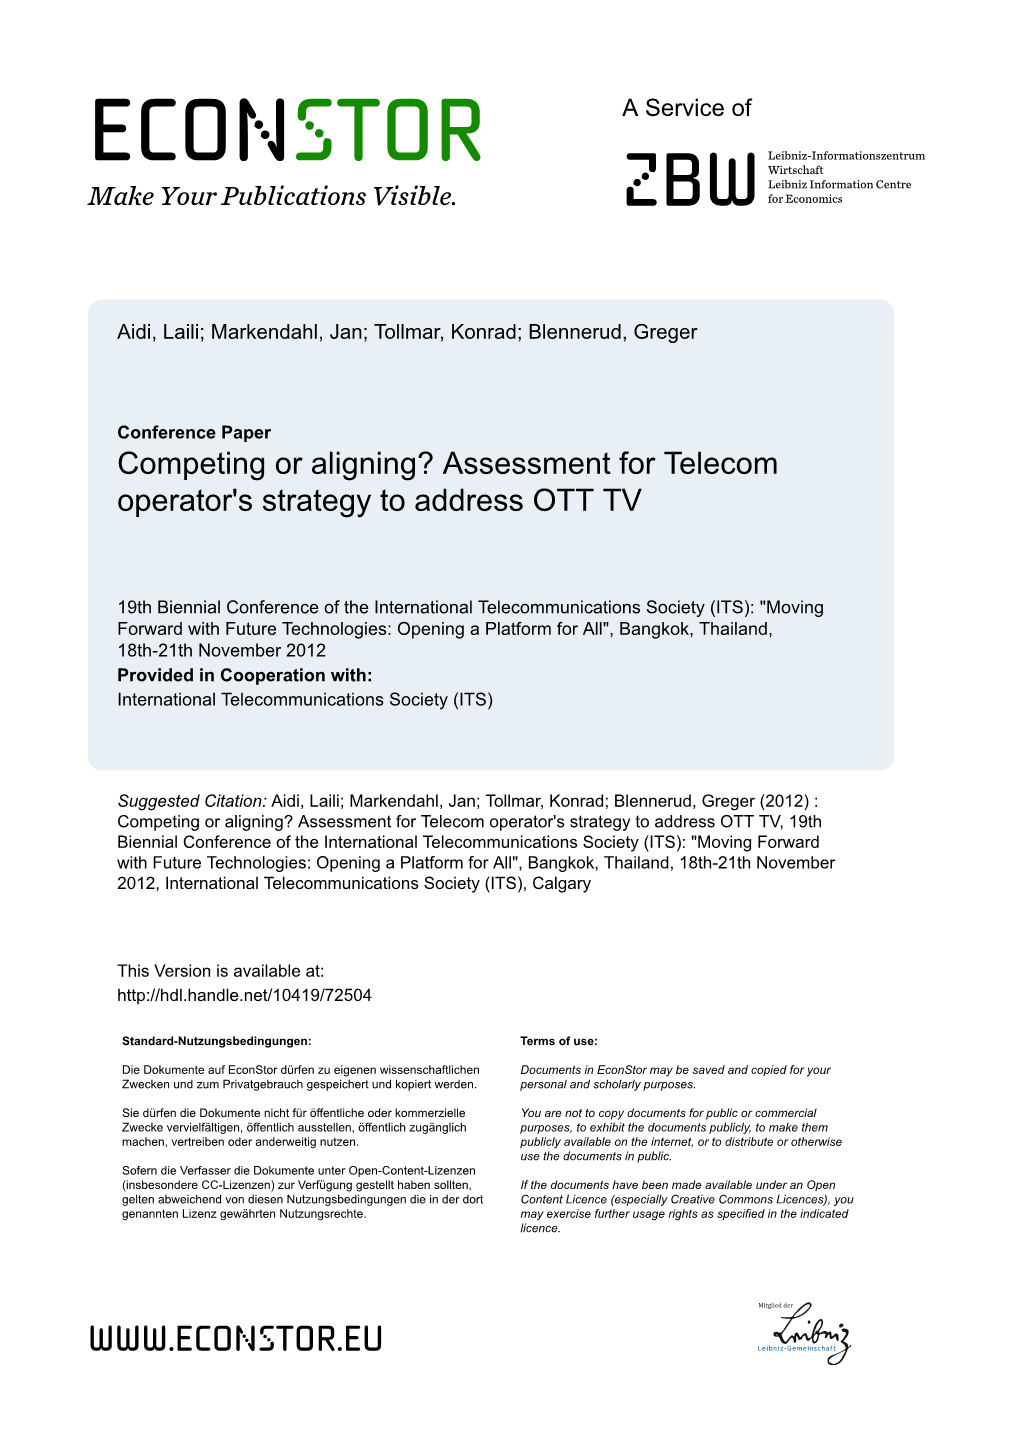 Competing Or Aligning? Assessment for Telecom Operator's Strategy to Address OTT TV